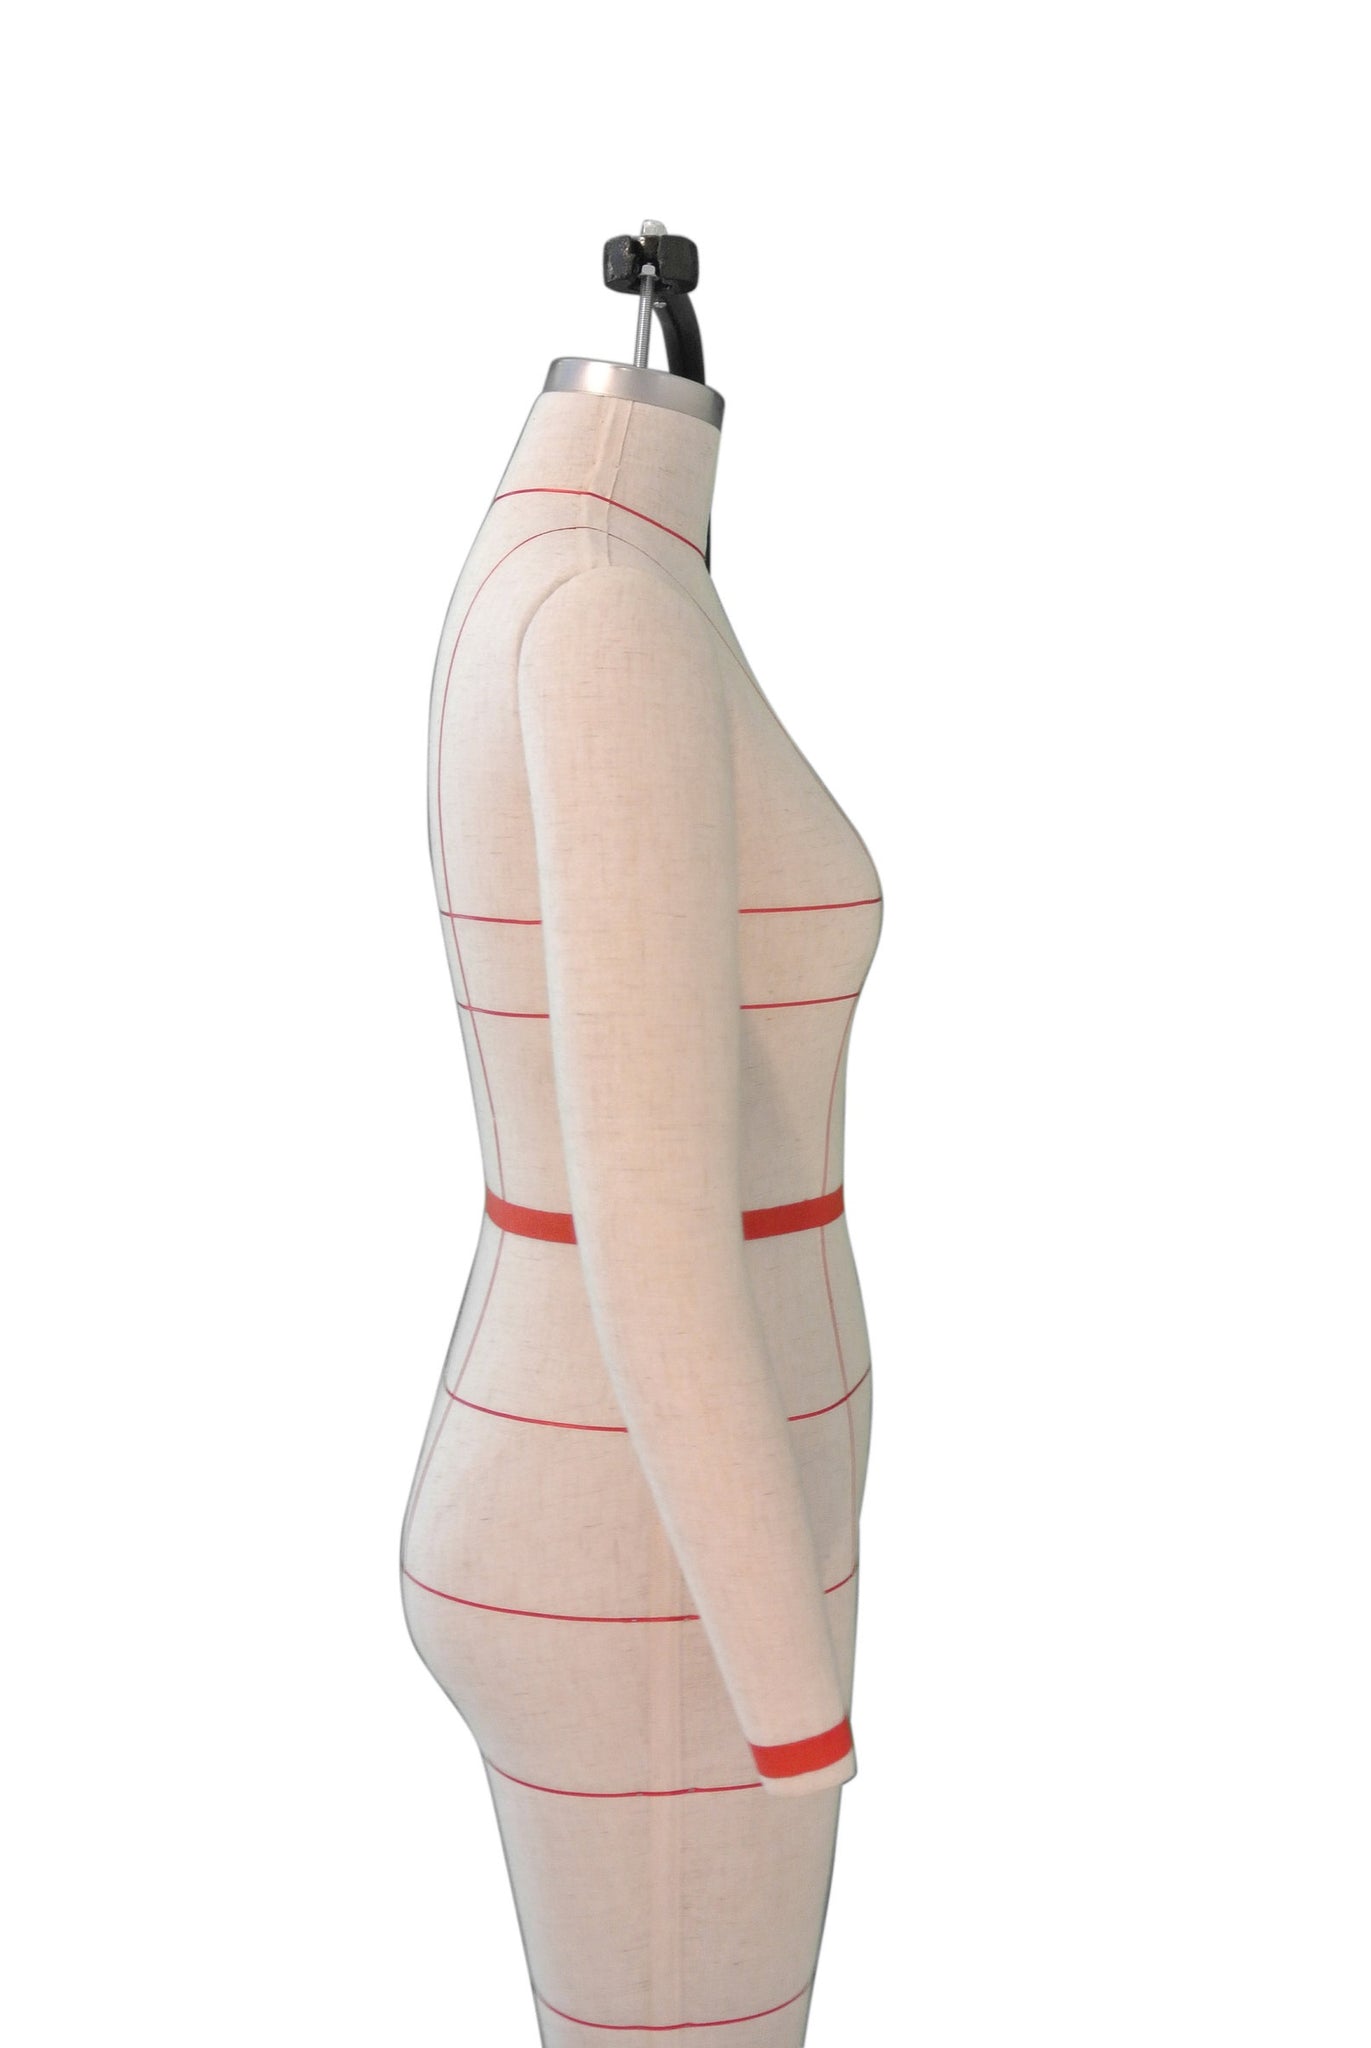 Lily Female Mannequin Sewing Dummy